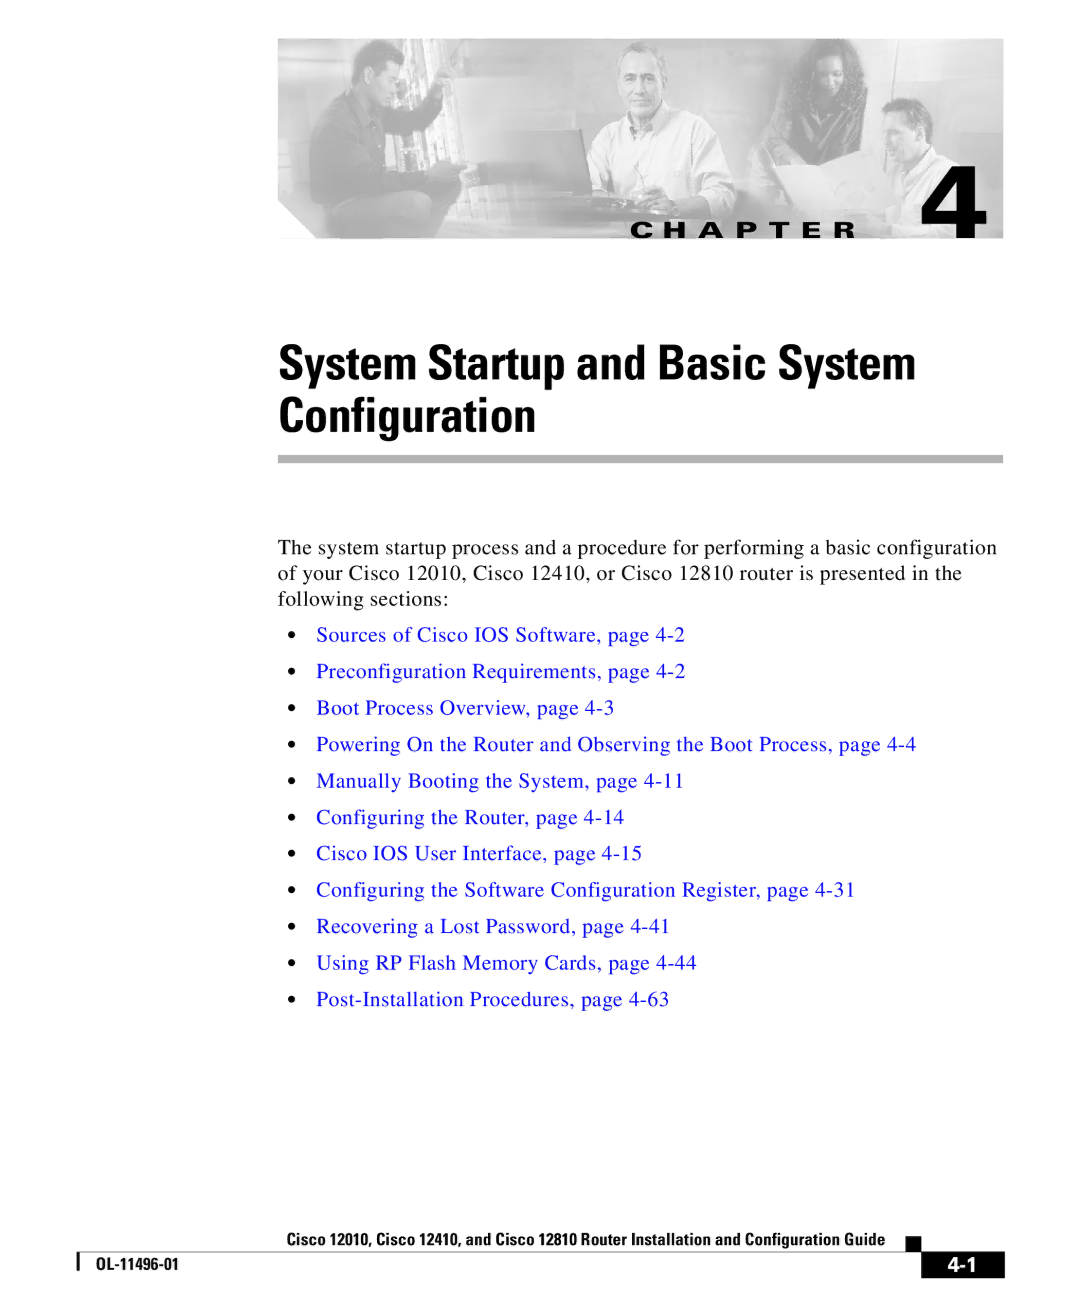 Cisco Systems 12810, 12010, 12410 manual System Startup and Basic System Configuration 